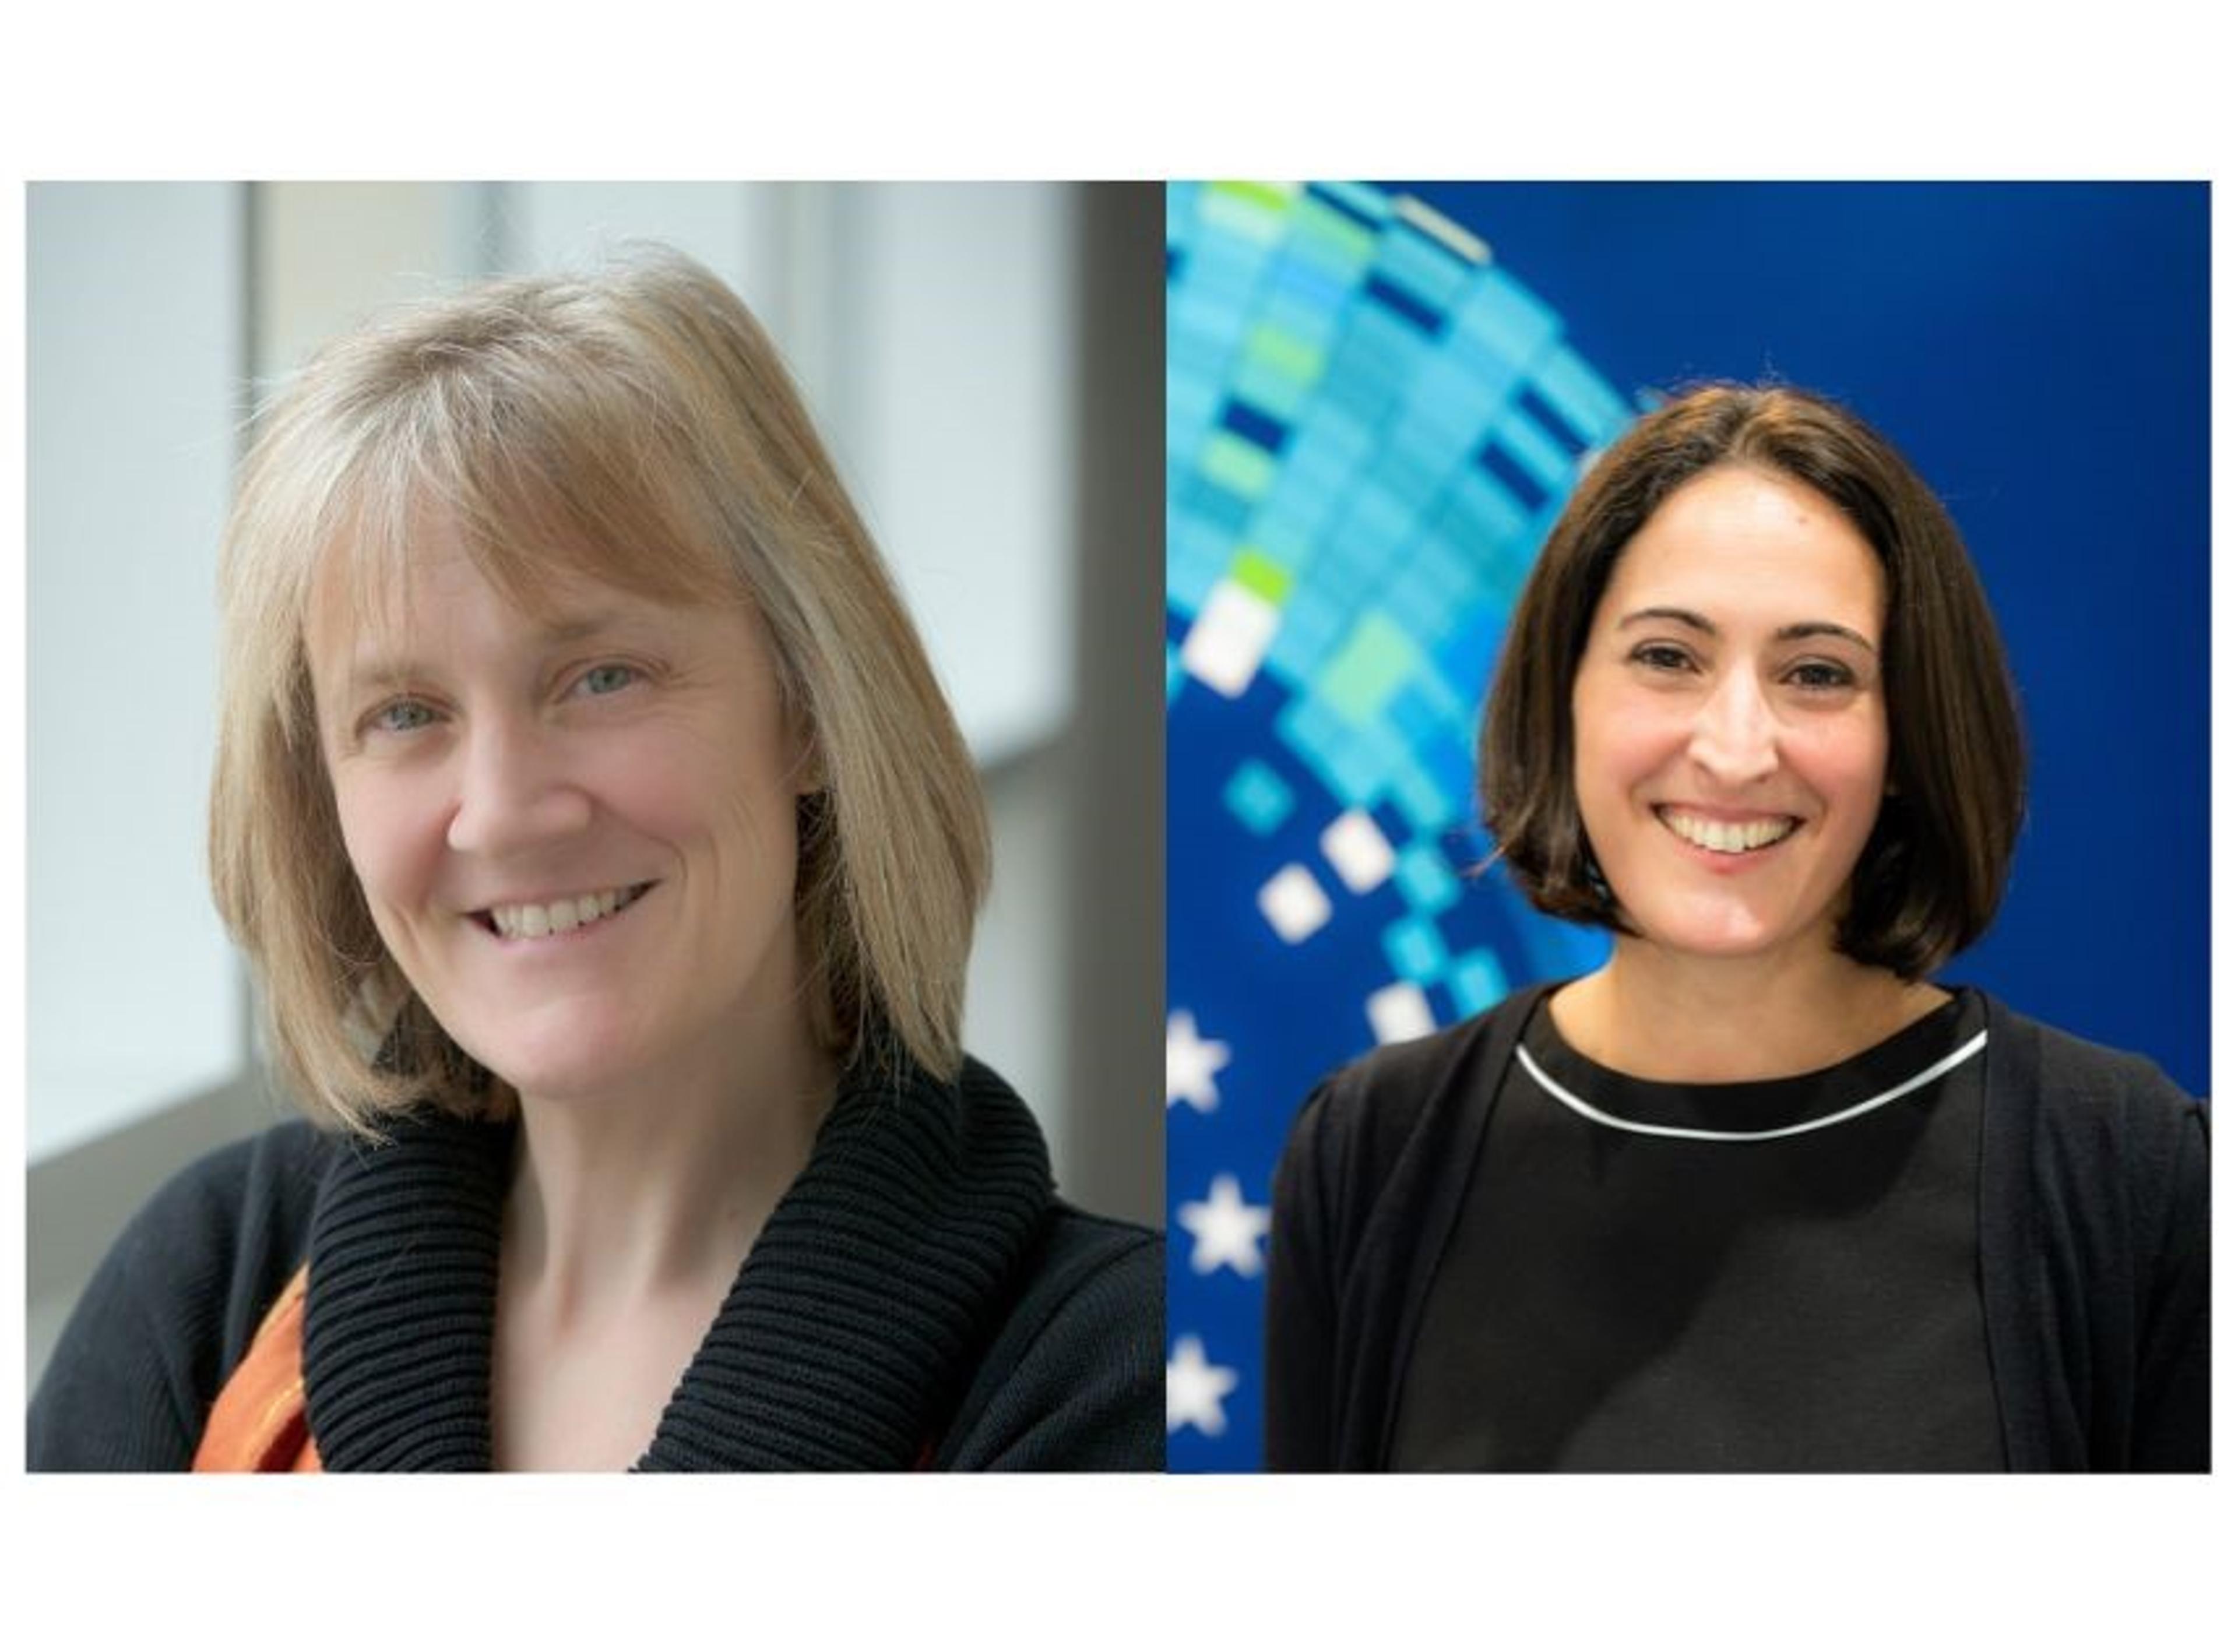 Prof. Elizabeth Meiering, President, The Protein Society, and Professor at University of Waterloo, and Melanie Leveridge, Chair, ELRIG UK, and Vice President Discovery Biology, AstraZeneca